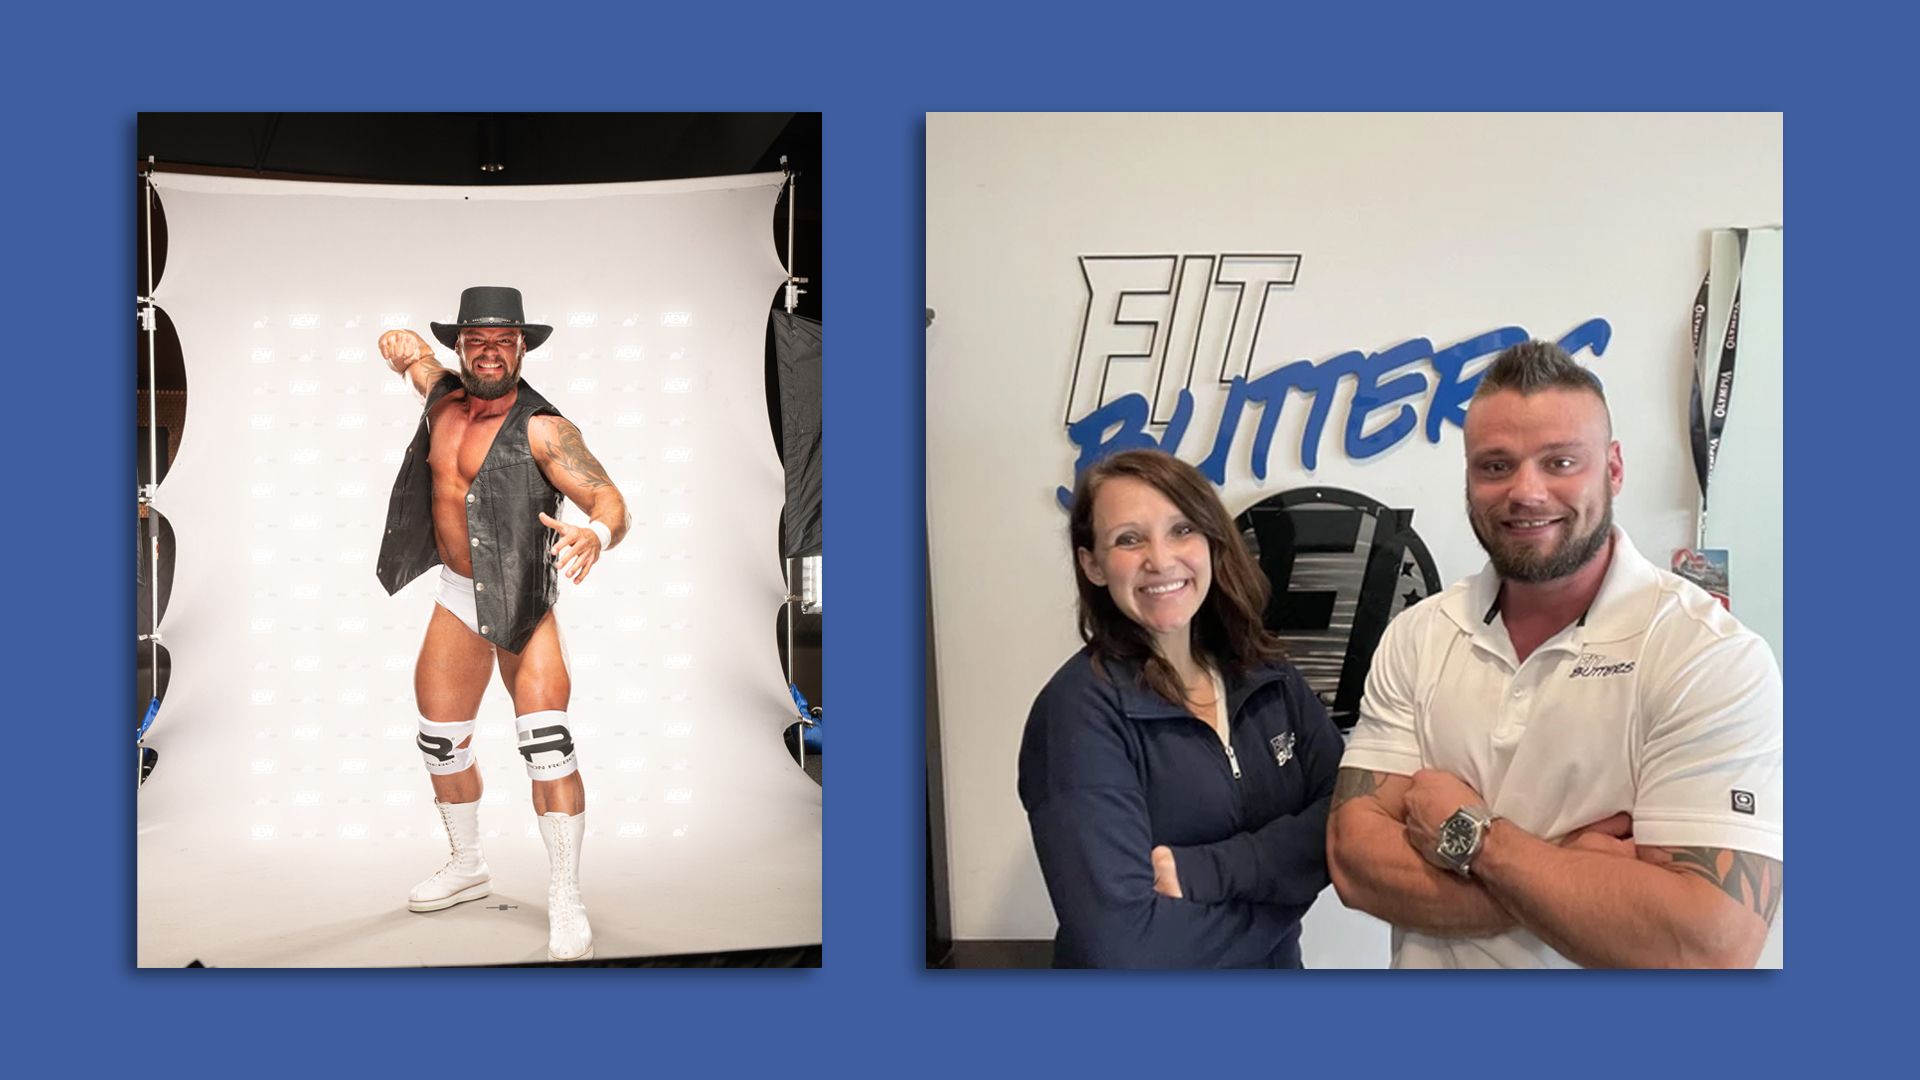 Ryan Bucki dressed as a wrestler on the left, with his wife Danielle on the right 